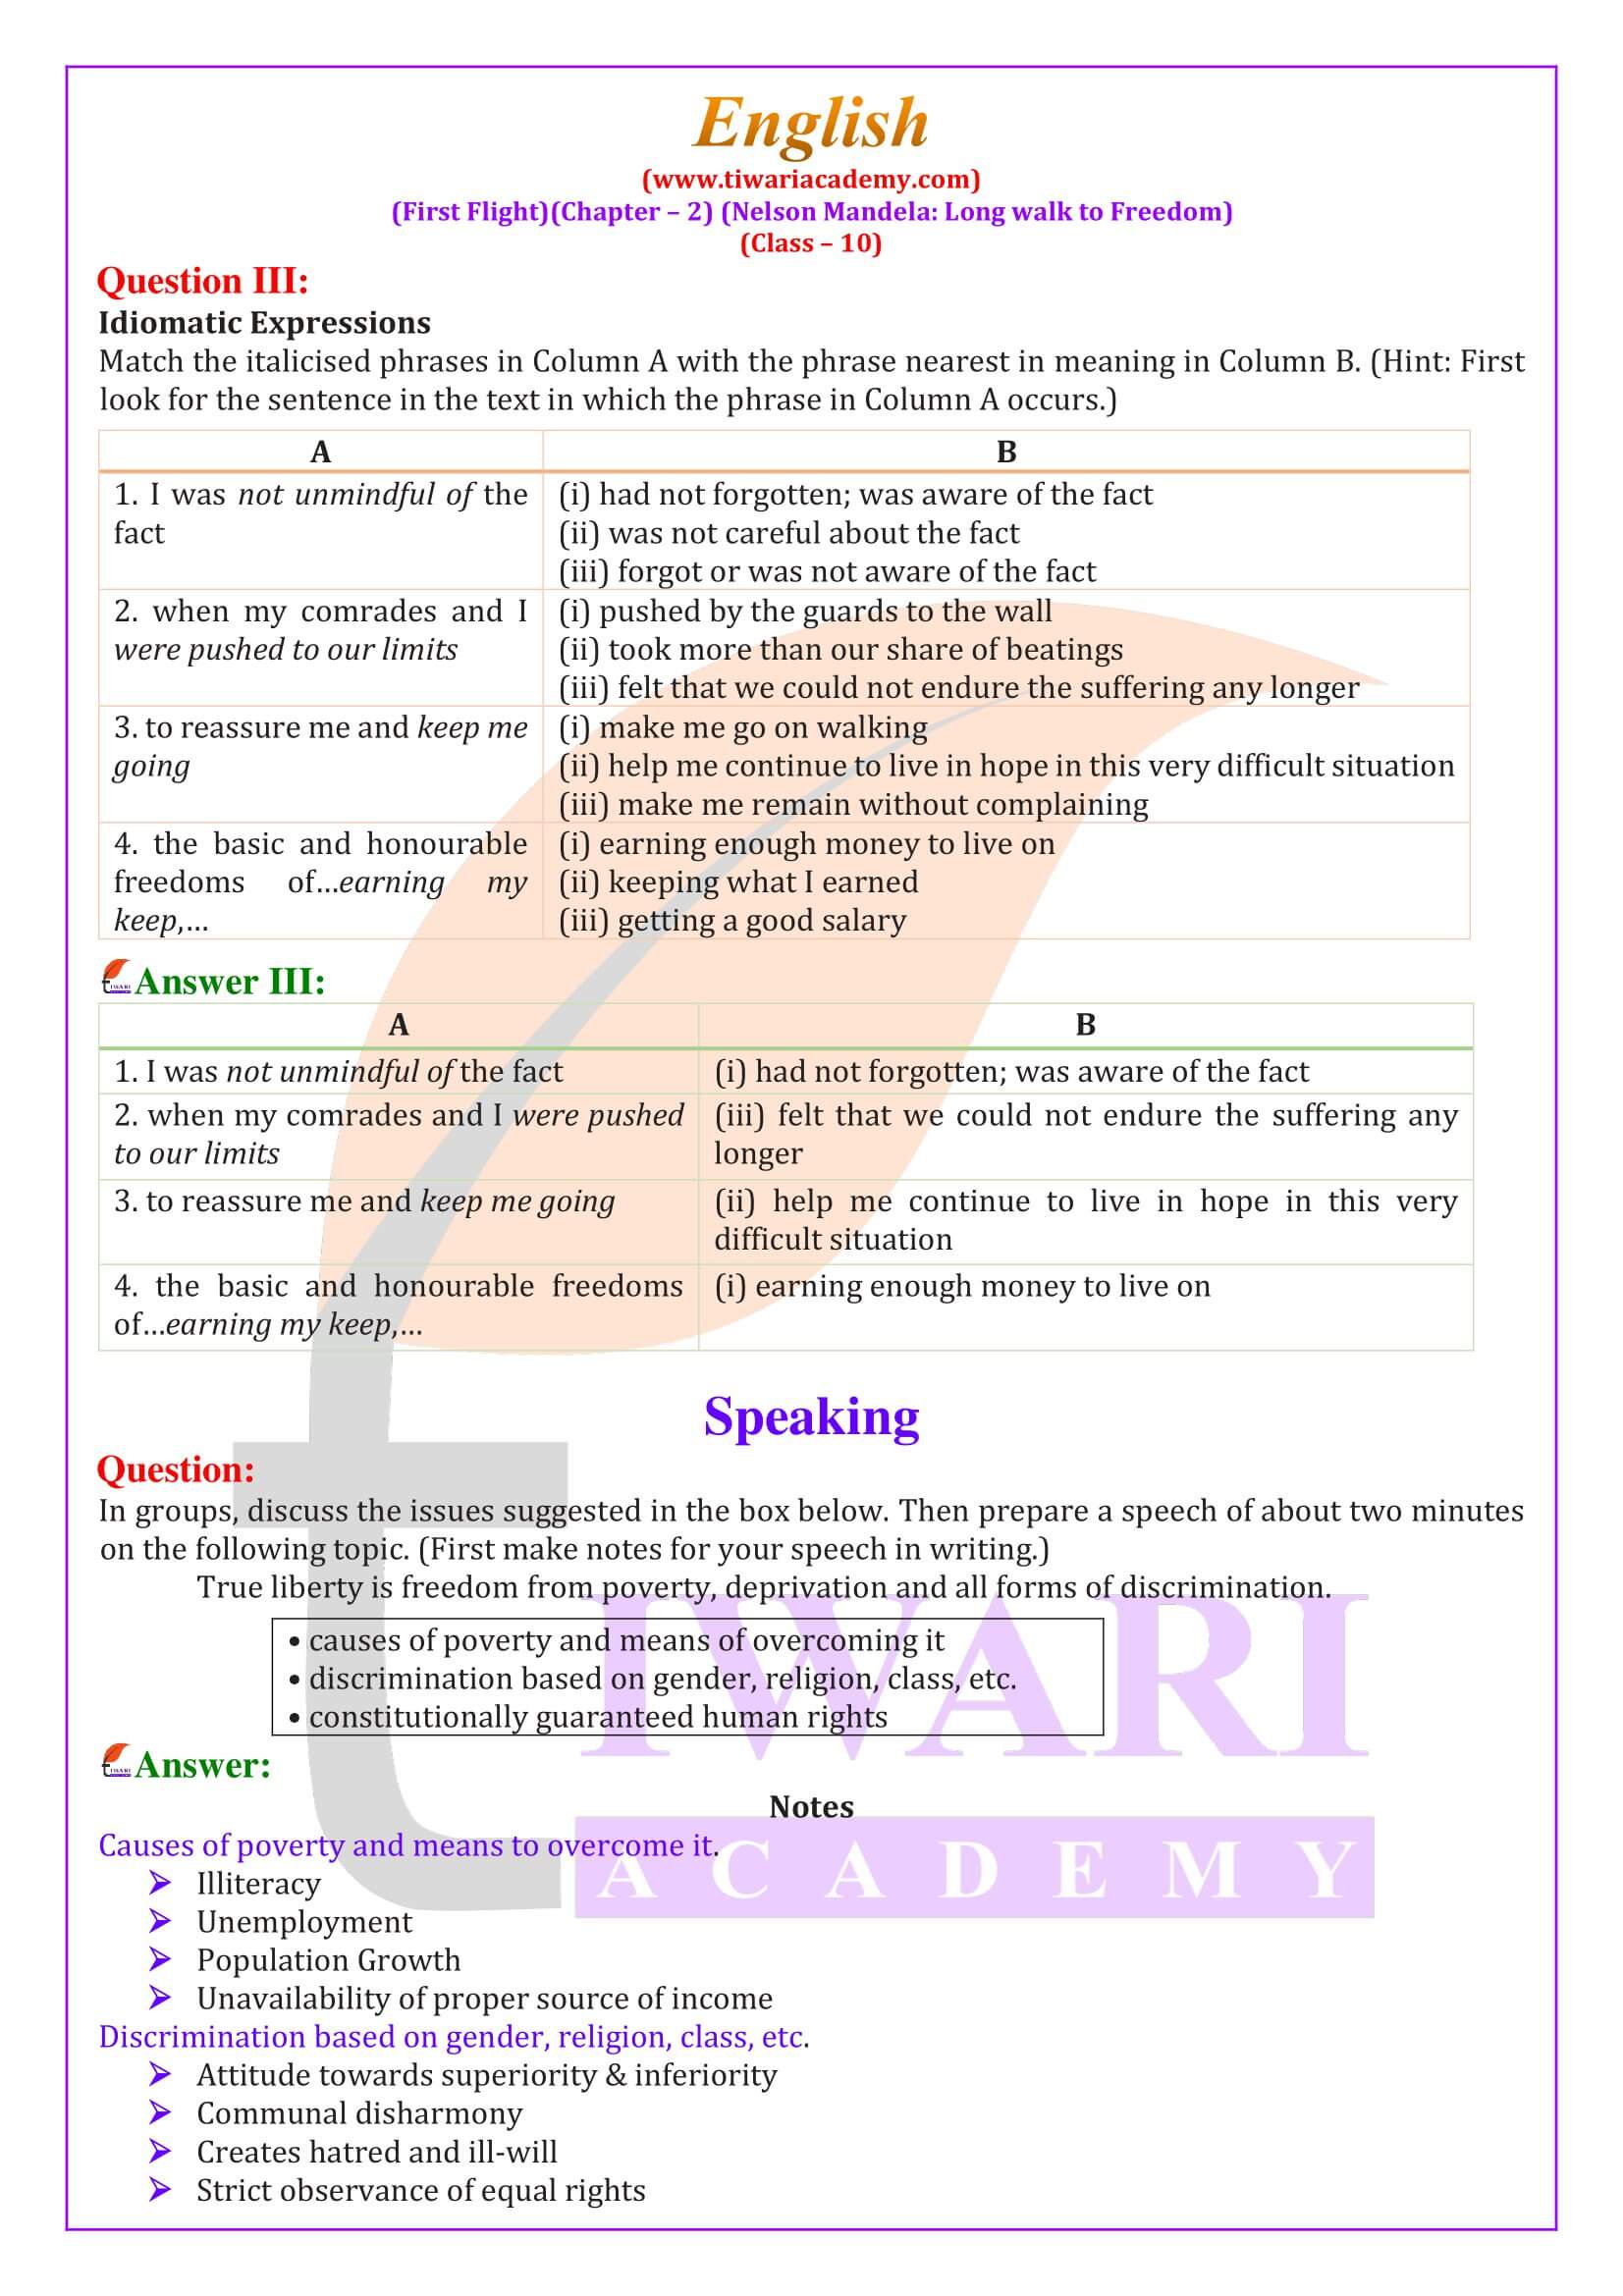 Class 10 English First Flight Chapter 2 Question Answers